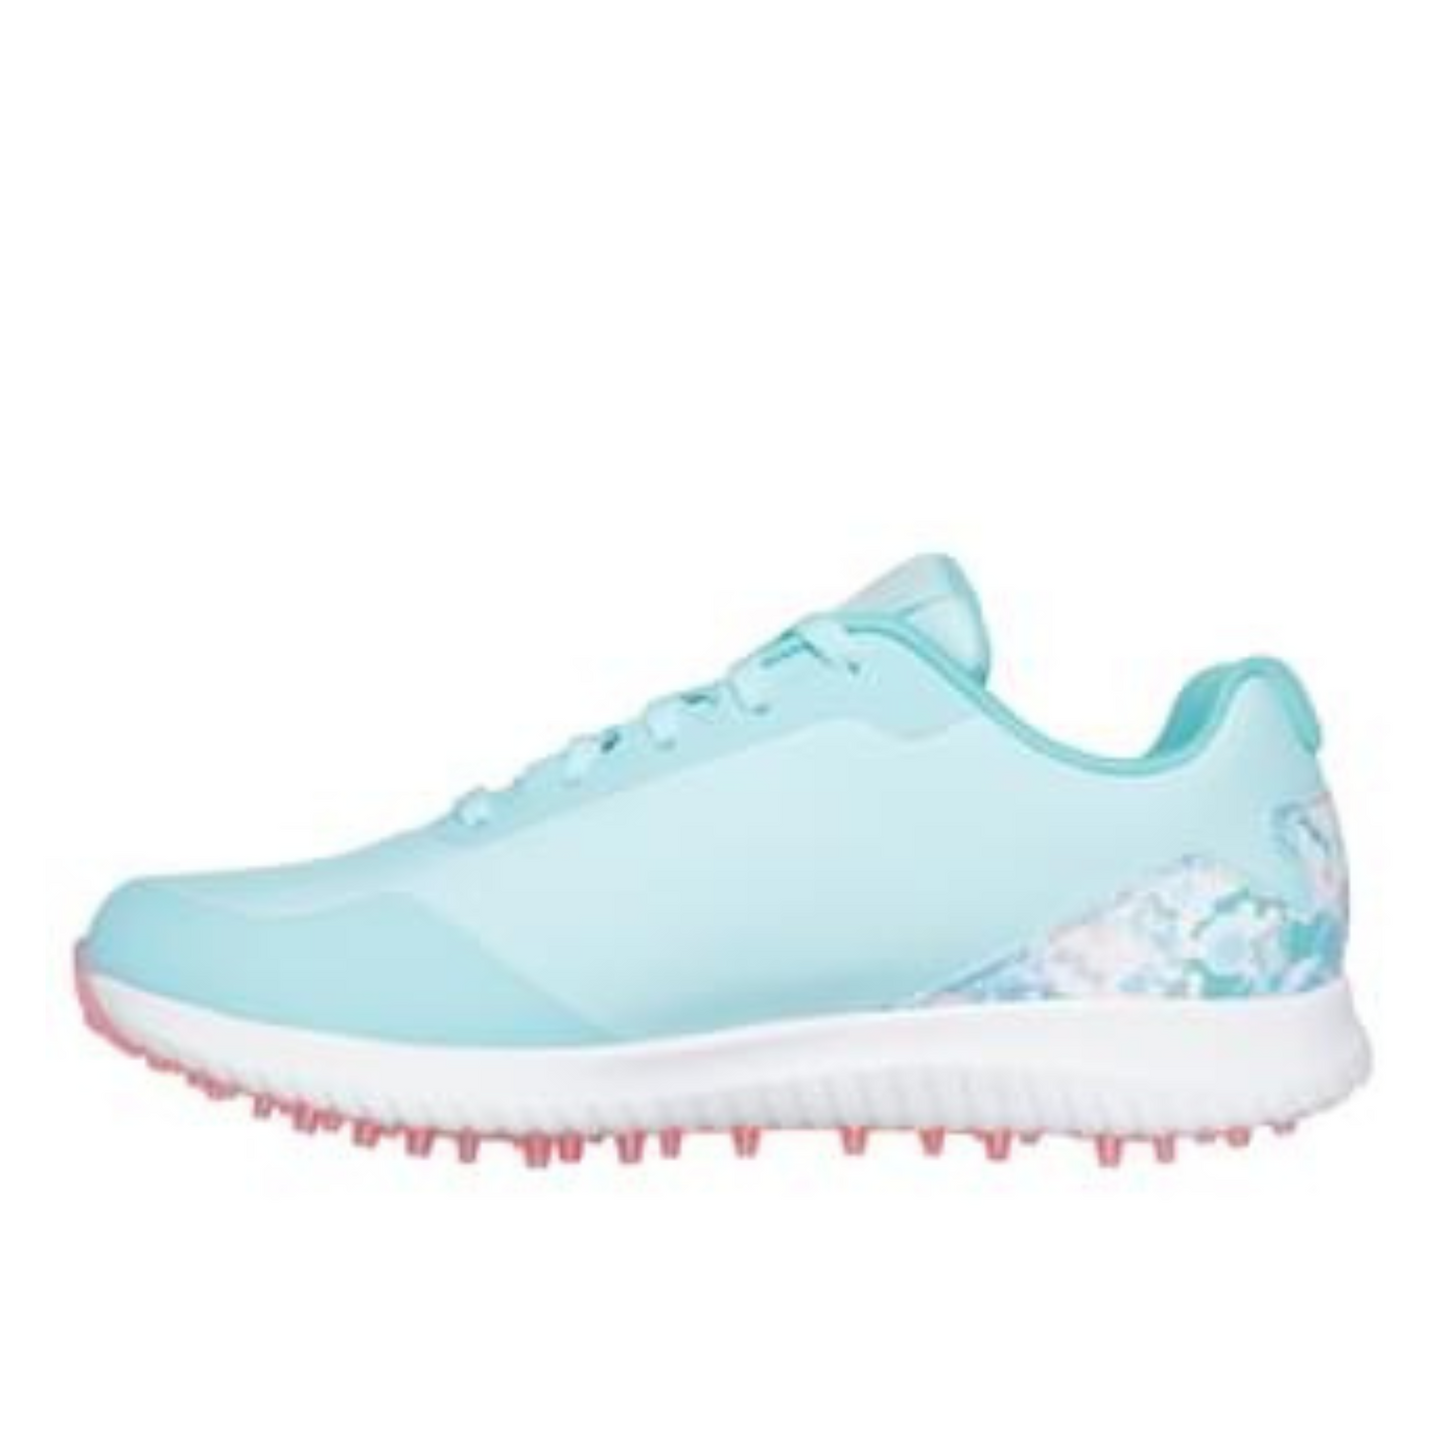 Skechers Go Golf Max 3 Ladies Spikeless Golf Shoes 123080 - Teal   